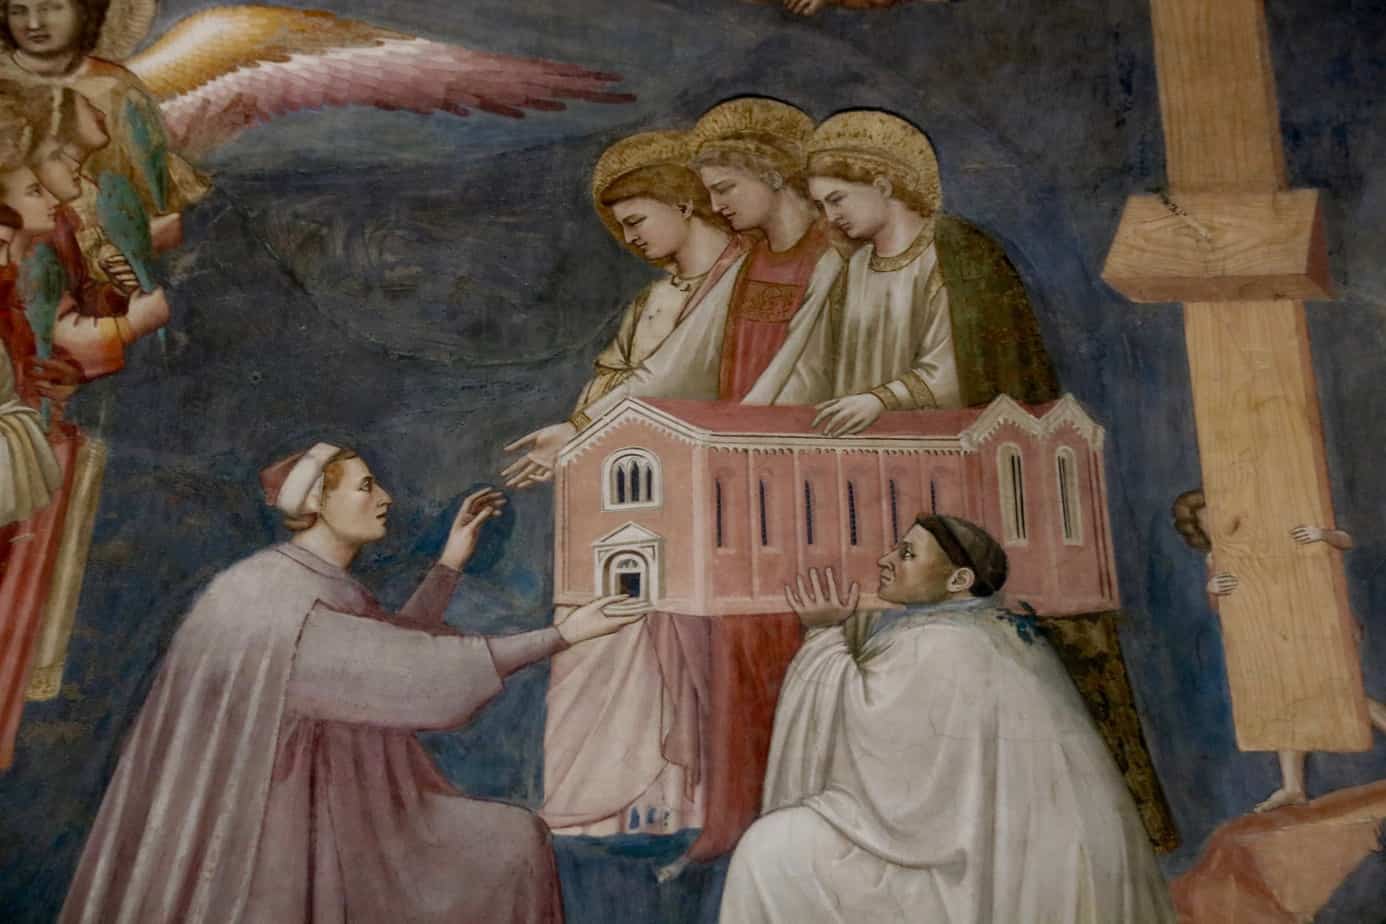 The Sins of the Father (Scrovegni Chapel)